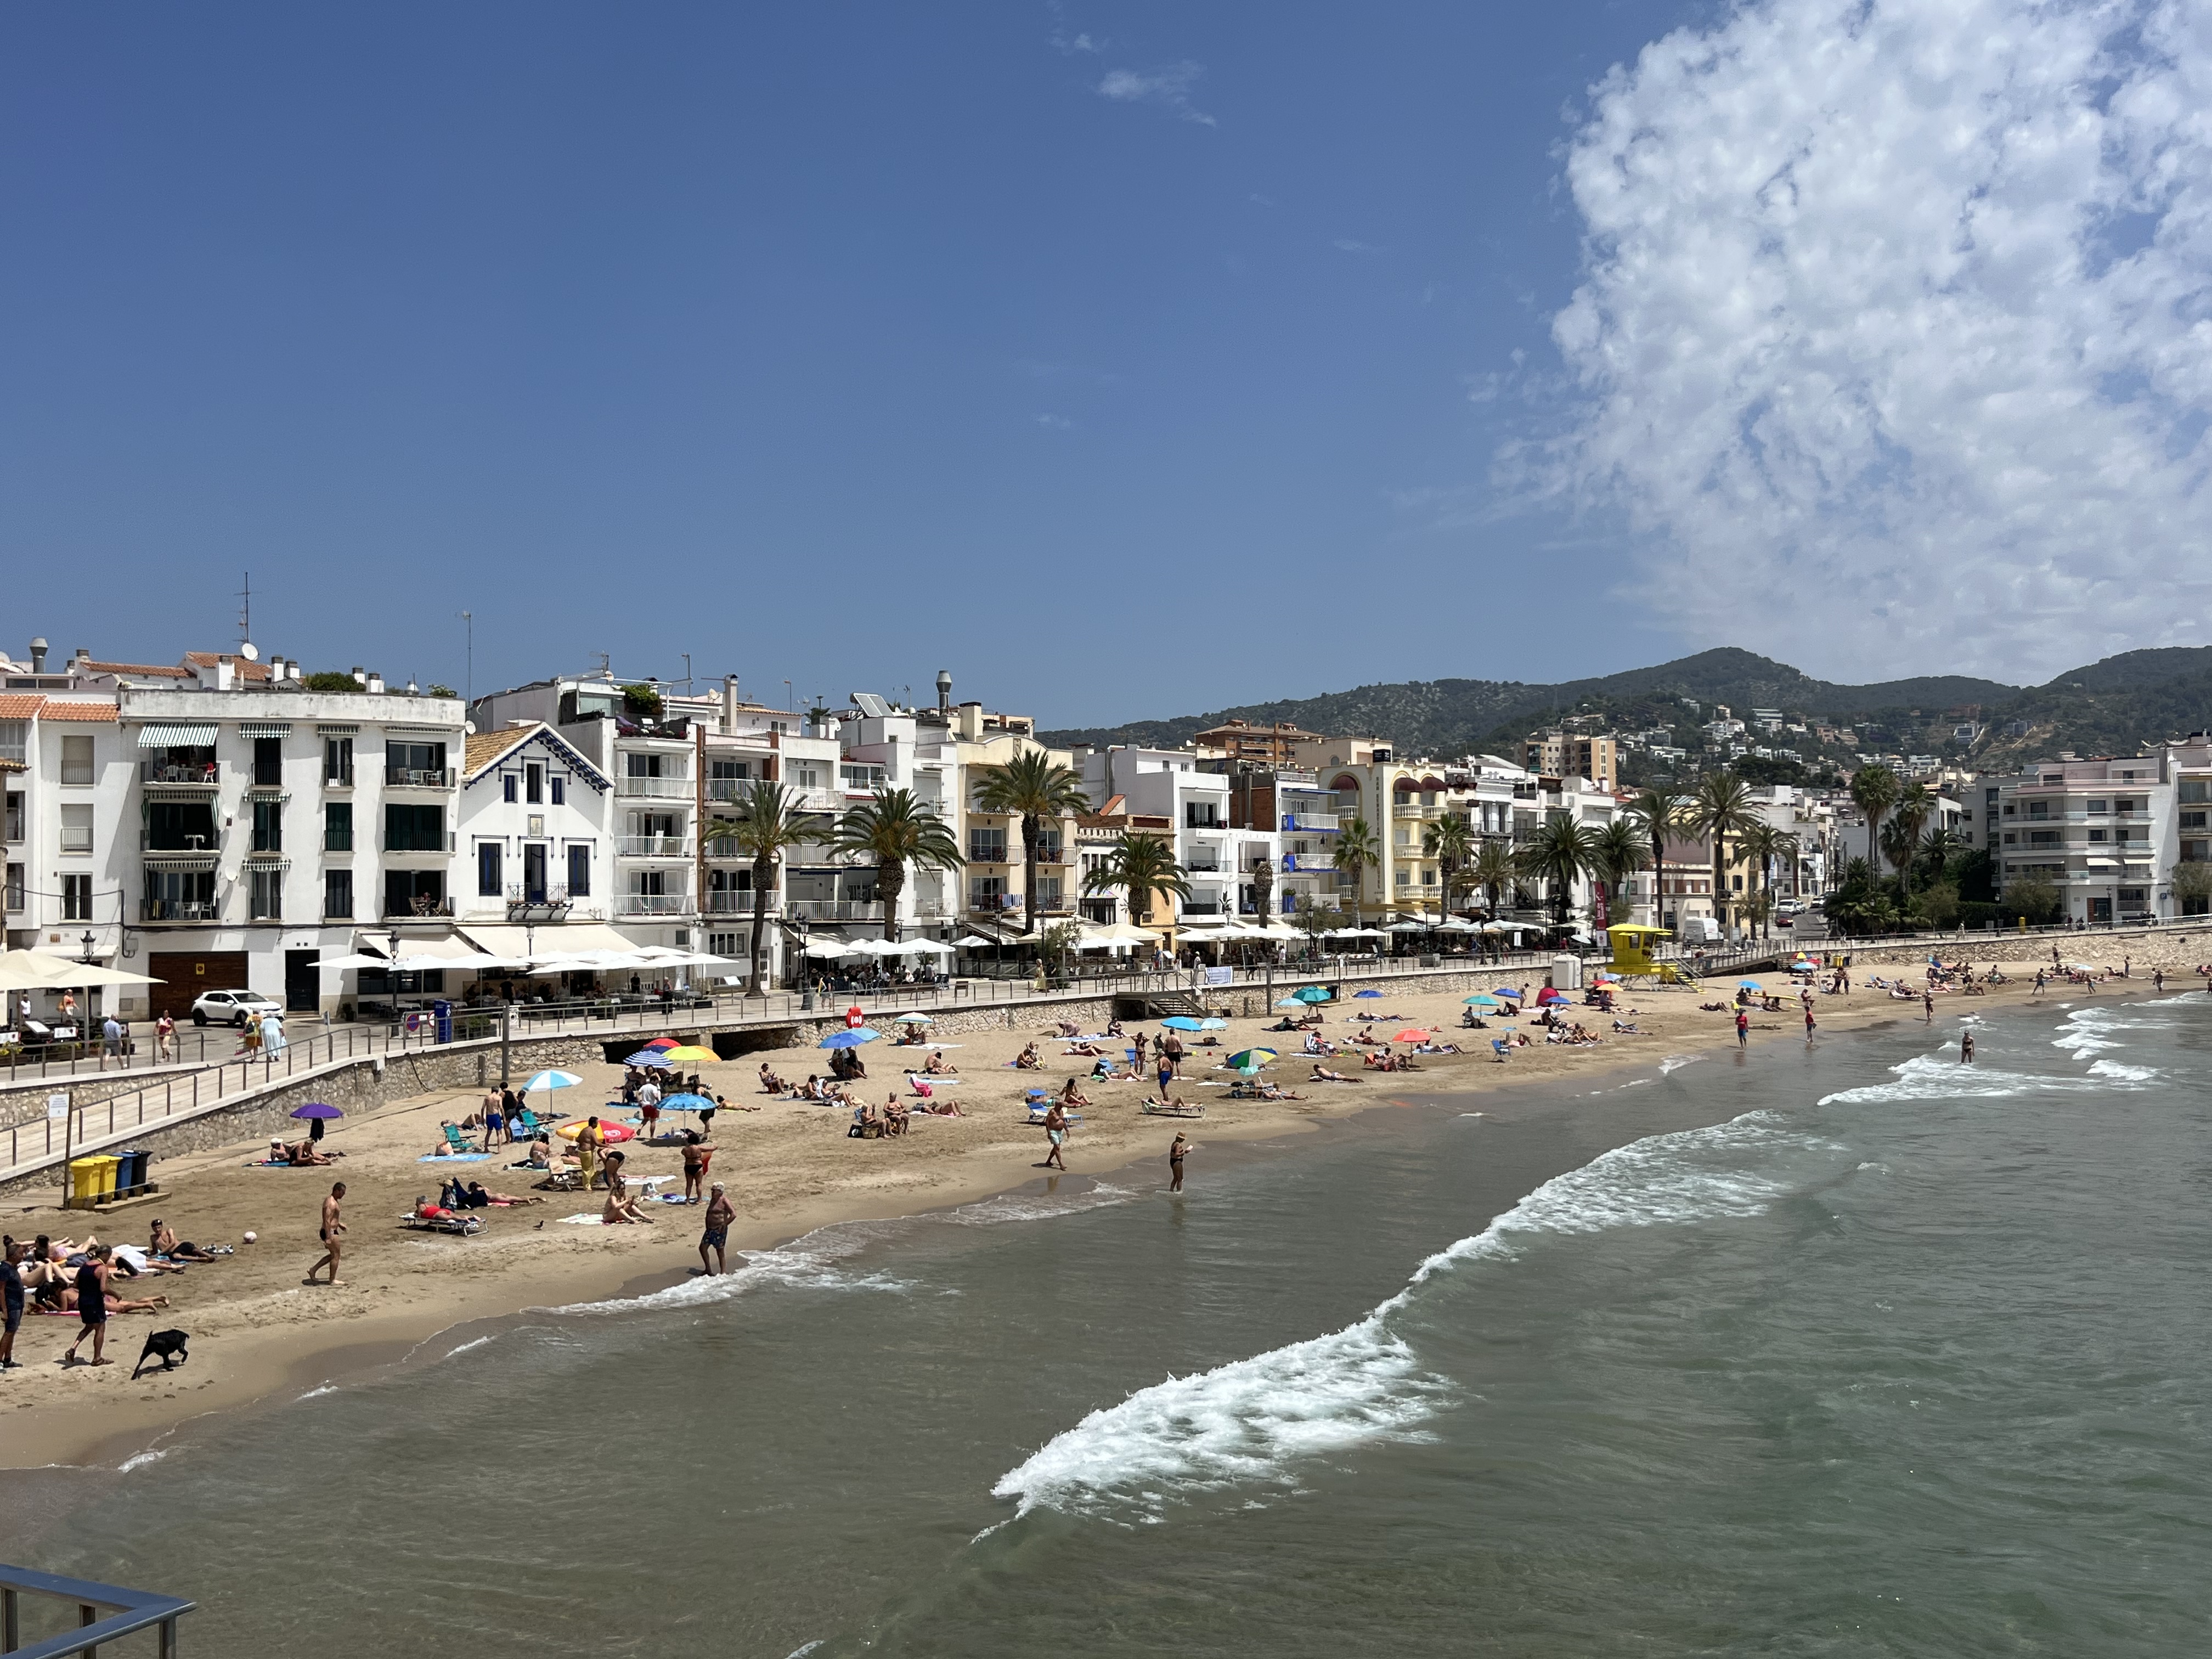 Our Visit to Sitges